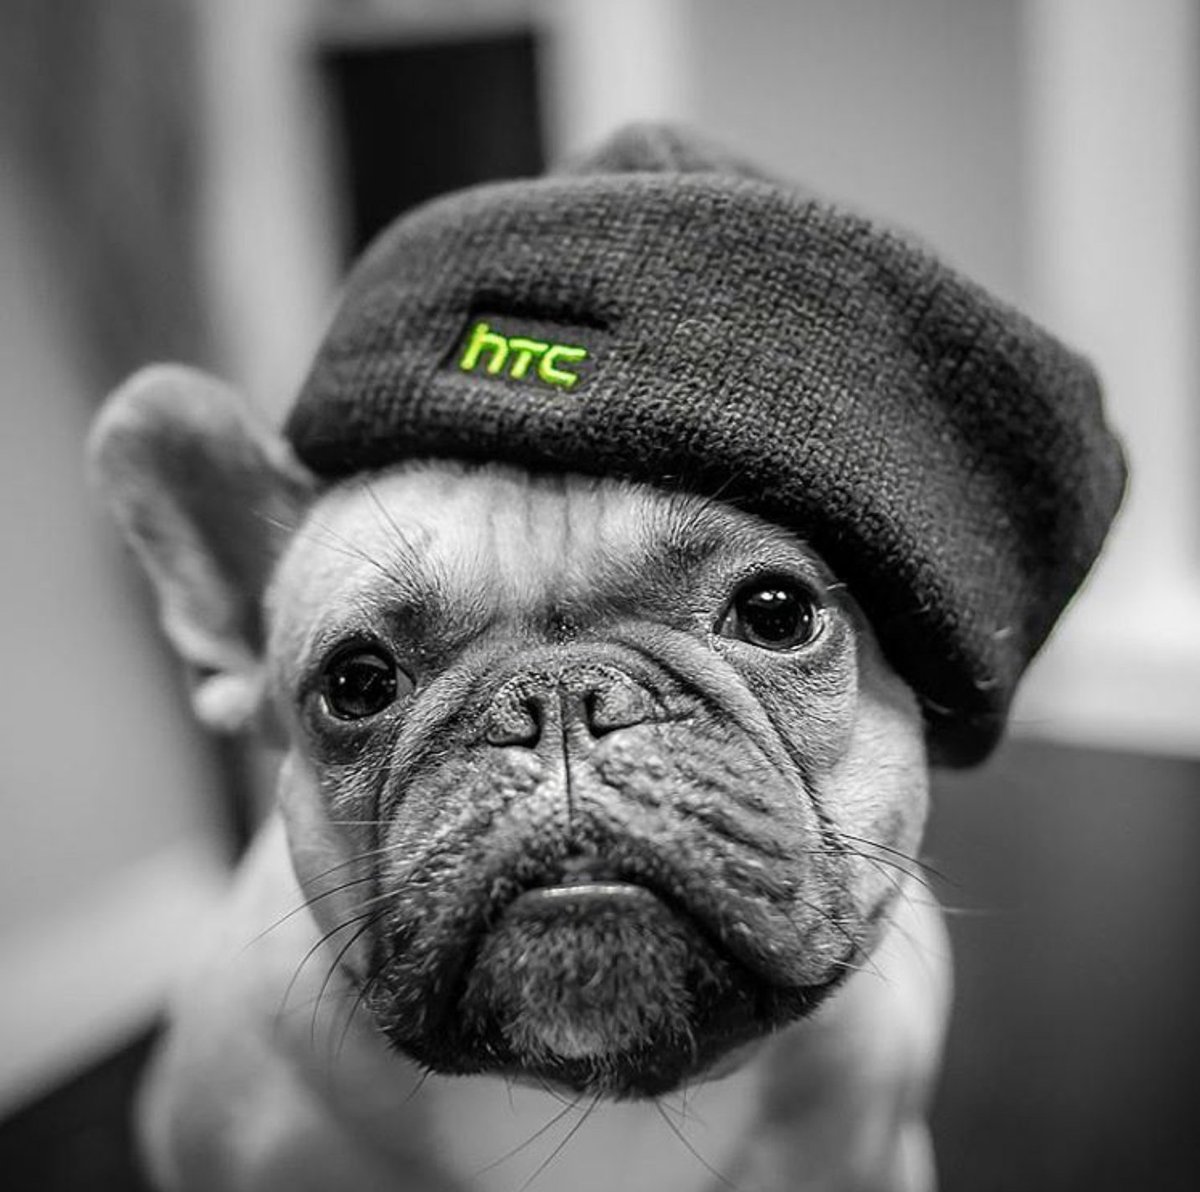 This Picture is Cute ! You all have a #lovely & #Blissful #Super #Sunday #TeamHTC #TeamElevate @htc @HTCelevate #HTC @HTCUSA @HTC_UK #HappyWeekend ✌️✅